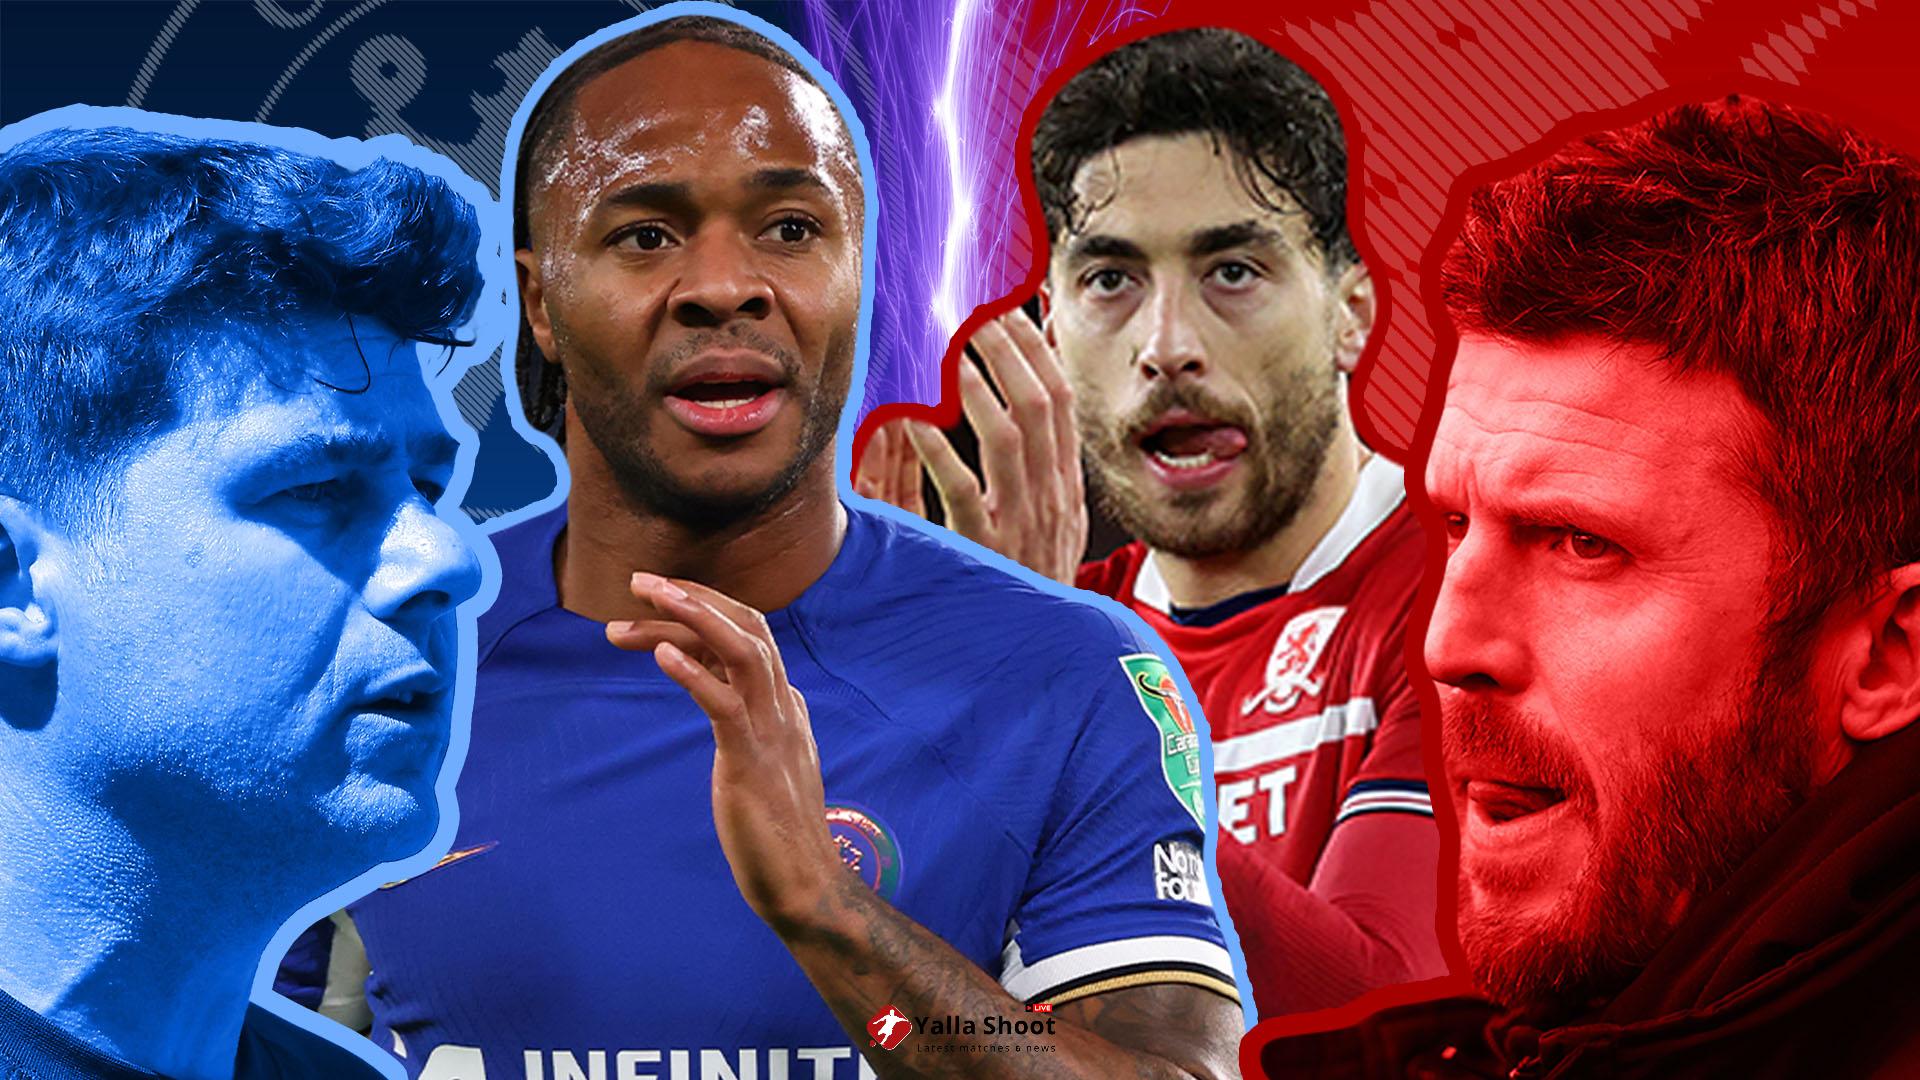 Chelsea vs Middlesbrough LIVE: Chilwell starts as Blues look to stage fightback in huge Carabao Cup semi - latest